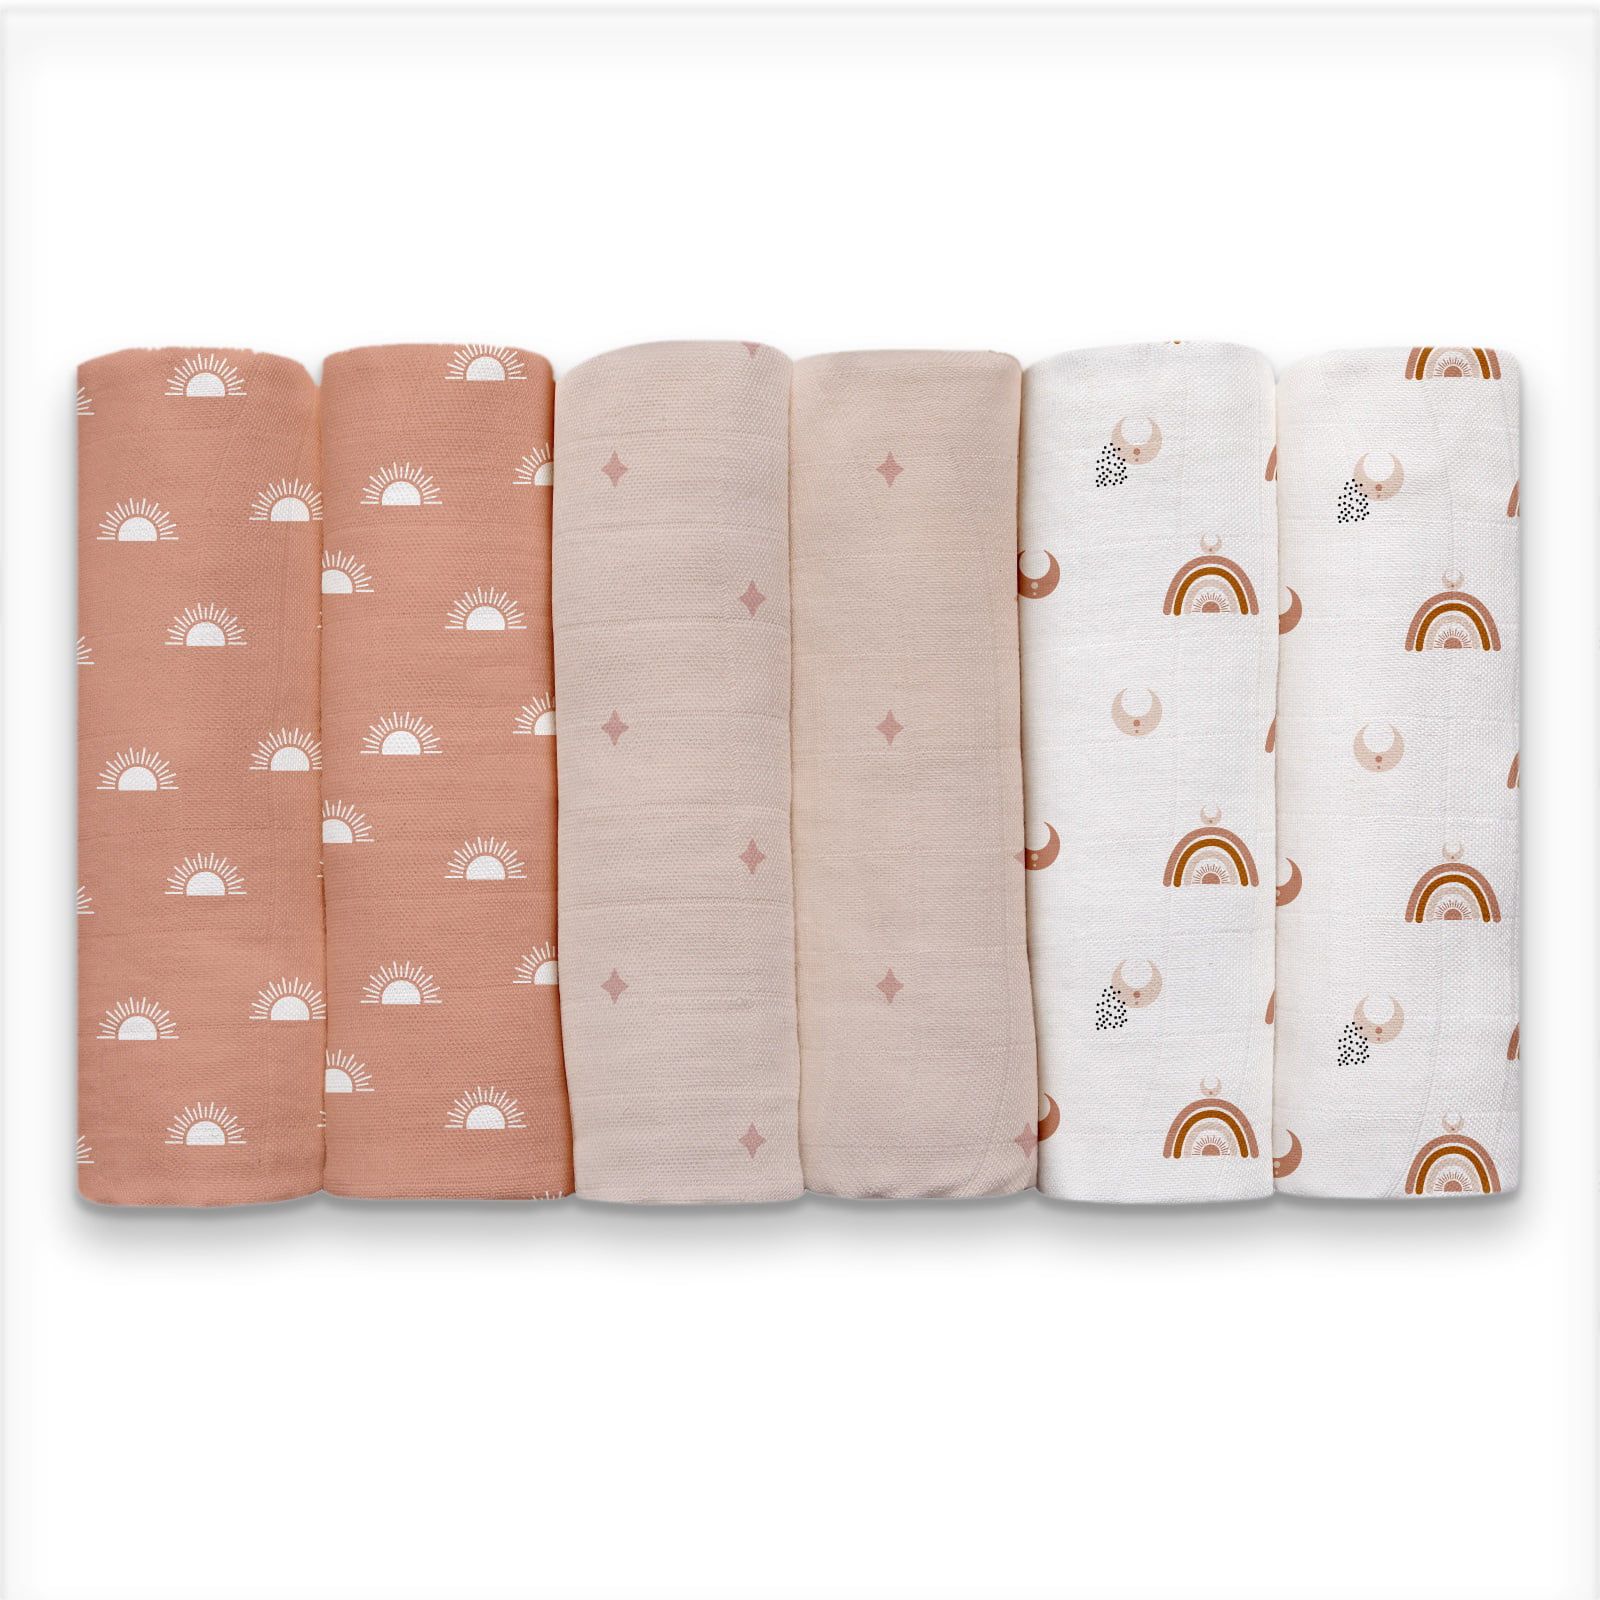 Gllquen Baby Muslin Swaddle Blankets 6-Pack, Organic Cotton Blankets for Newborn Infant Girls and... | Walmart (US)